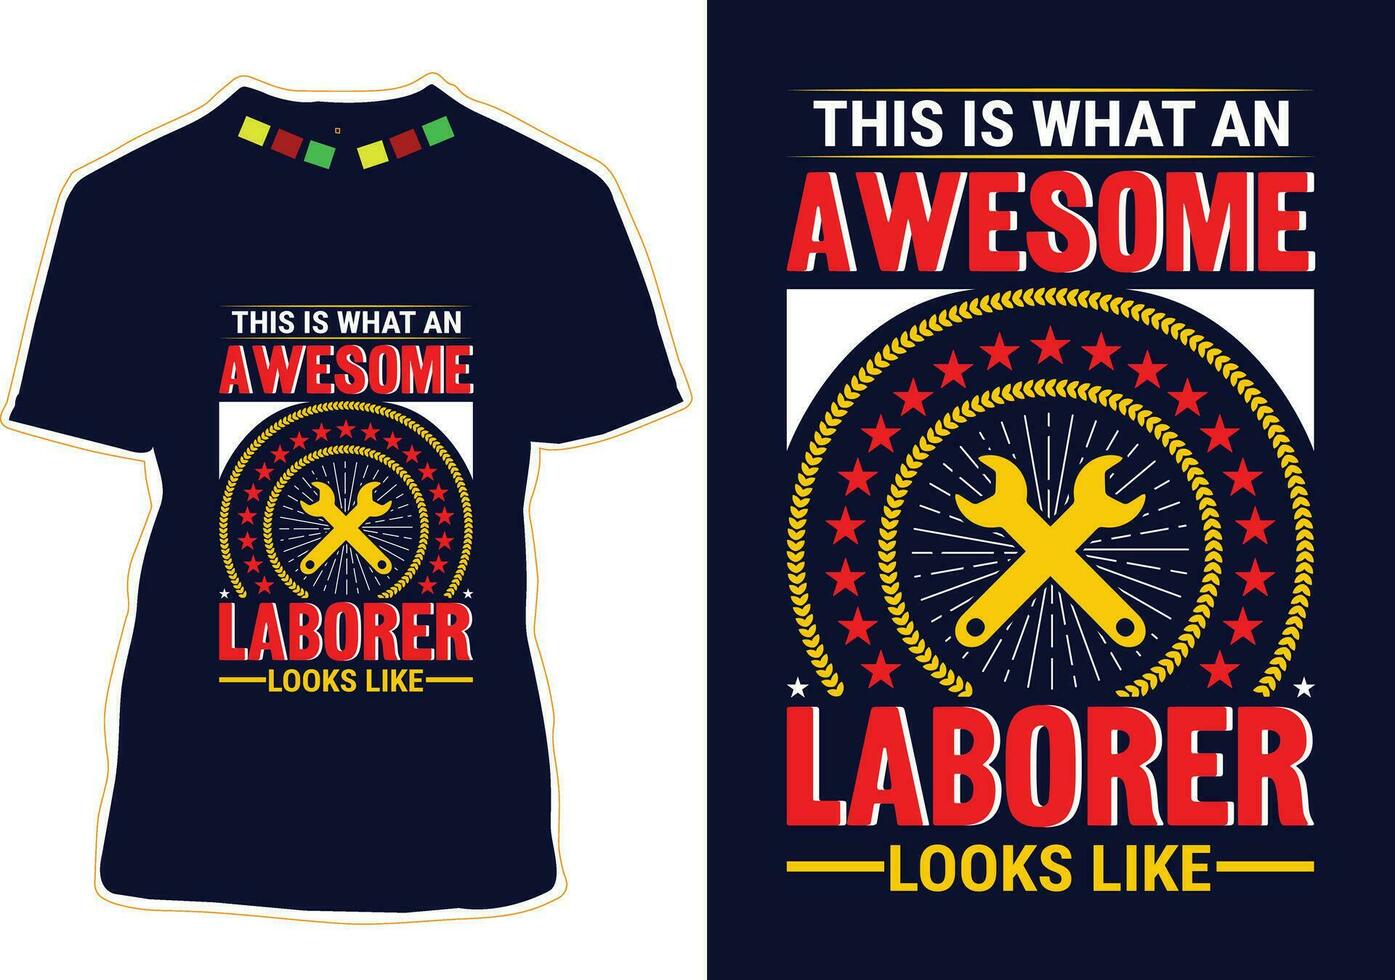 This Is What An Awesome Laborer Looks Like T-shirt Design vector